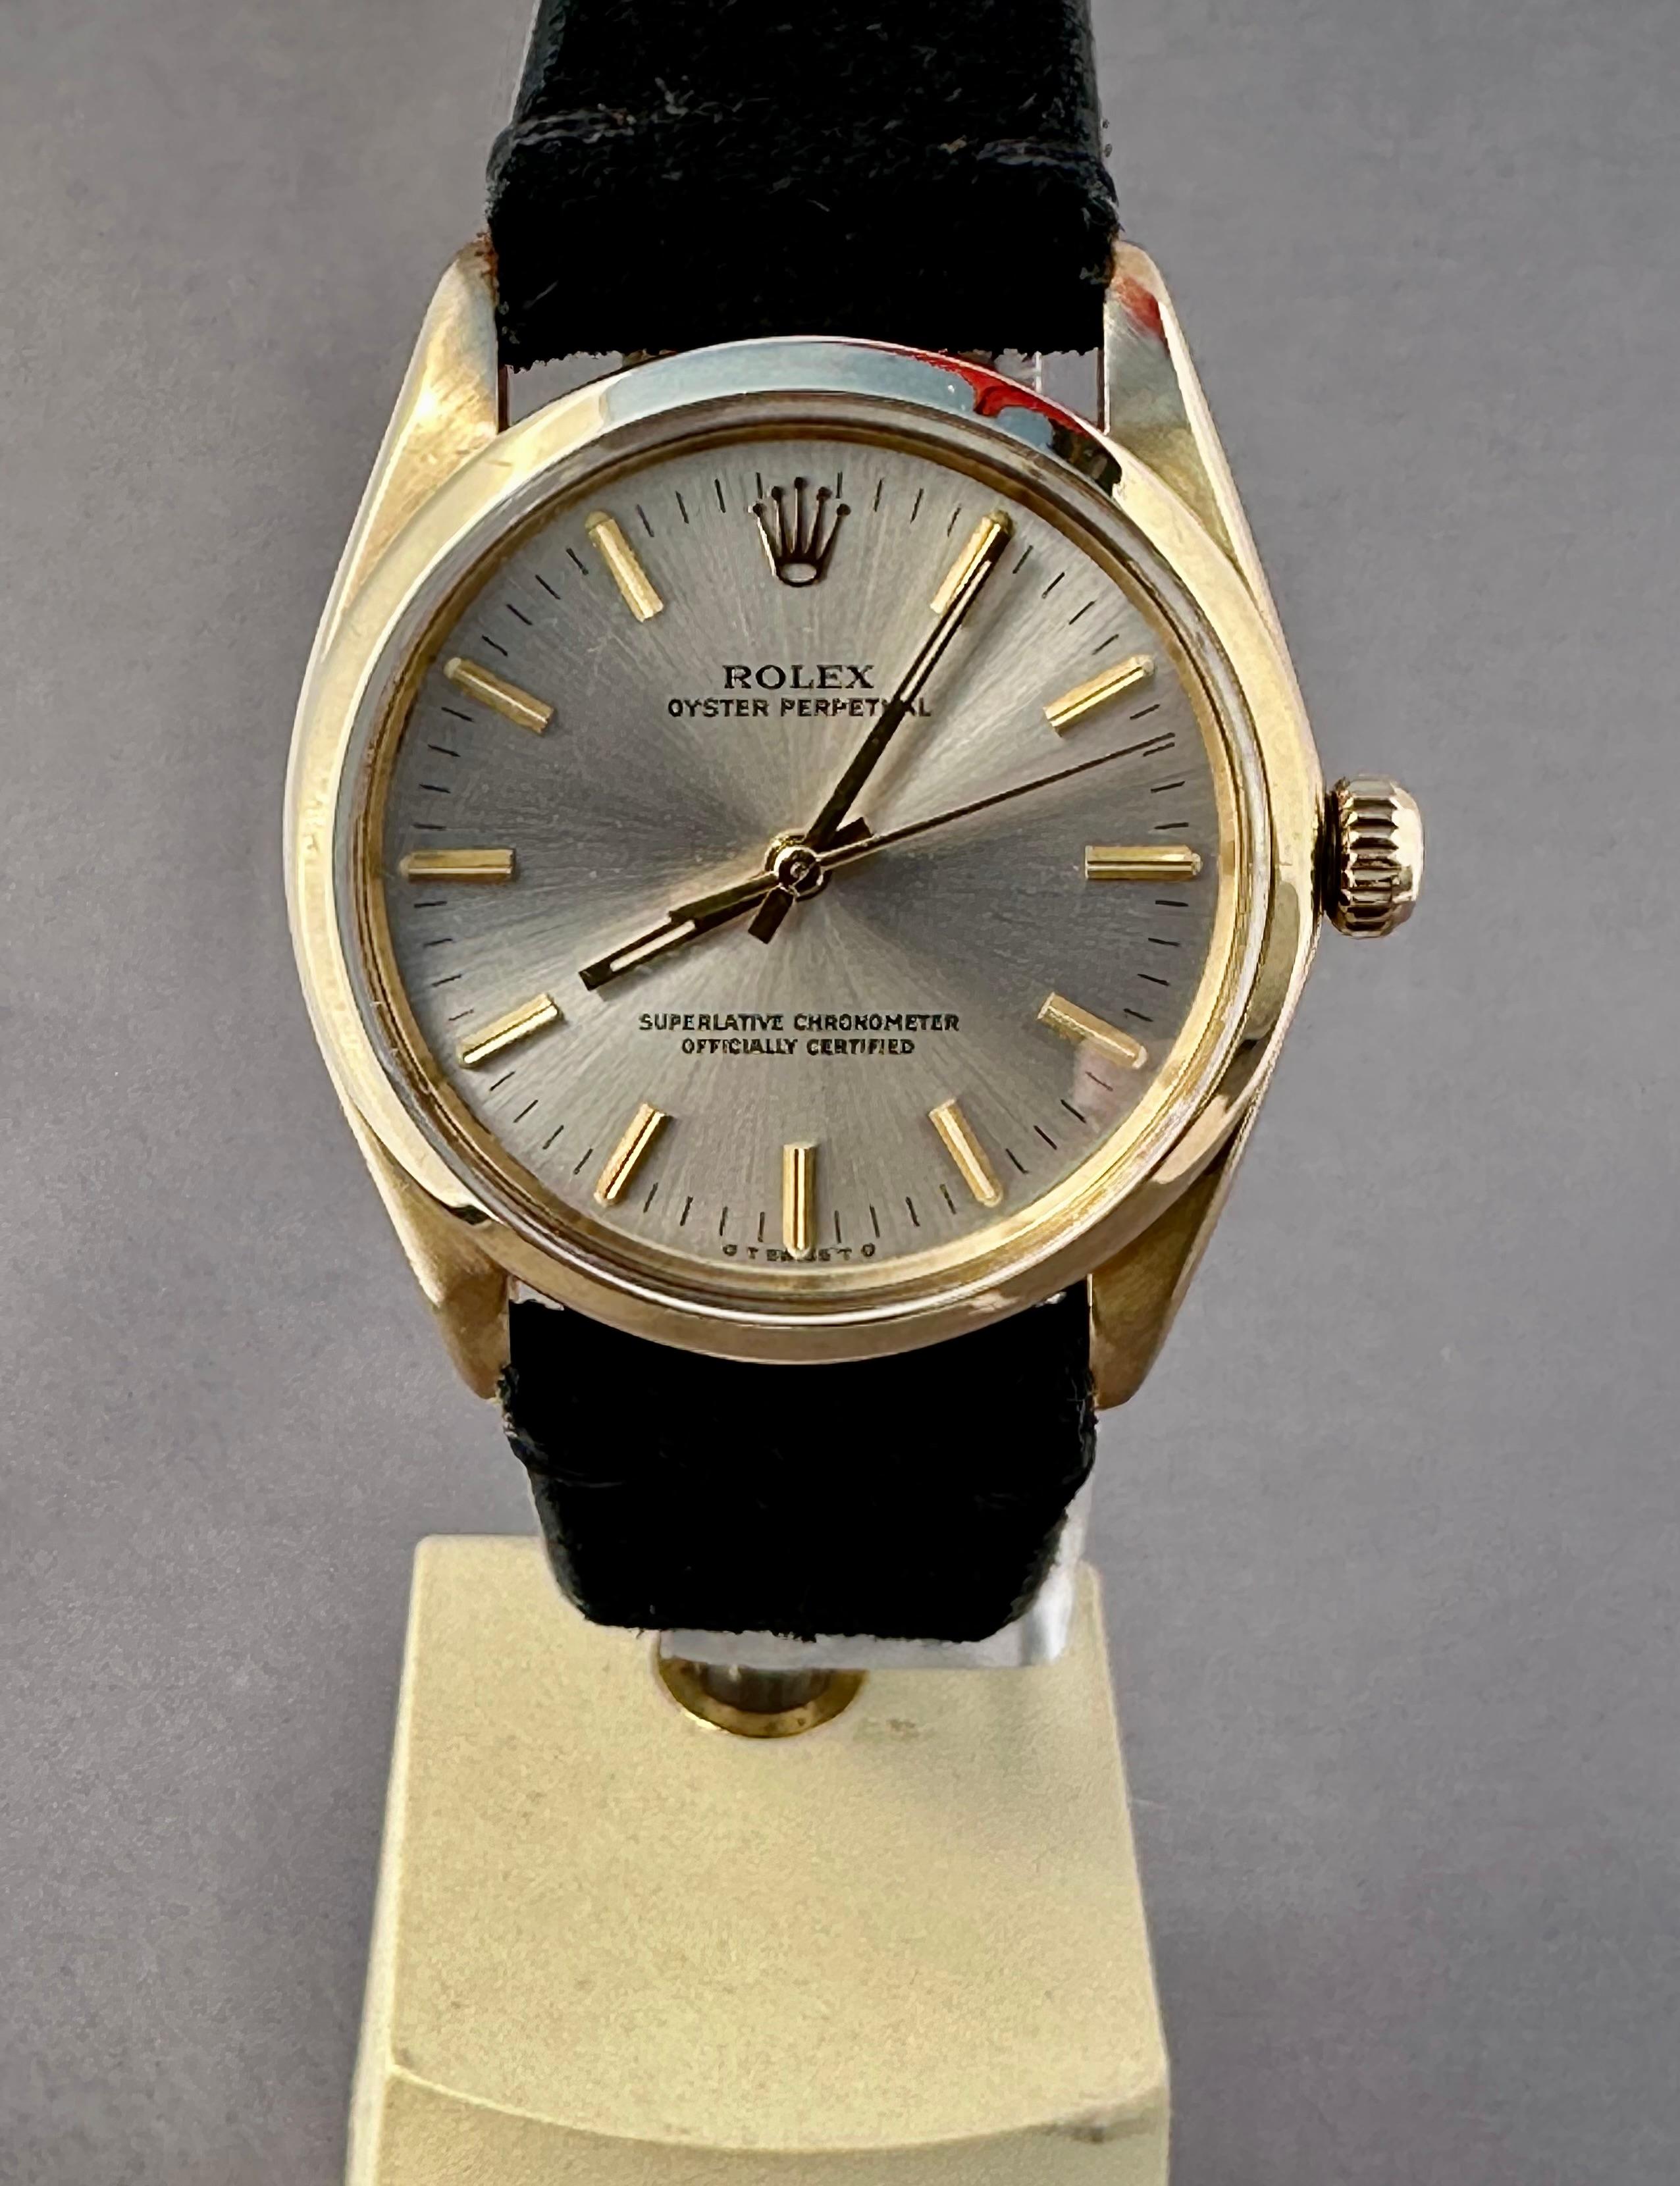 Rolex Oyster Perpetual Chronometer 14K Yellow Gold Ref. # 1002 1974 